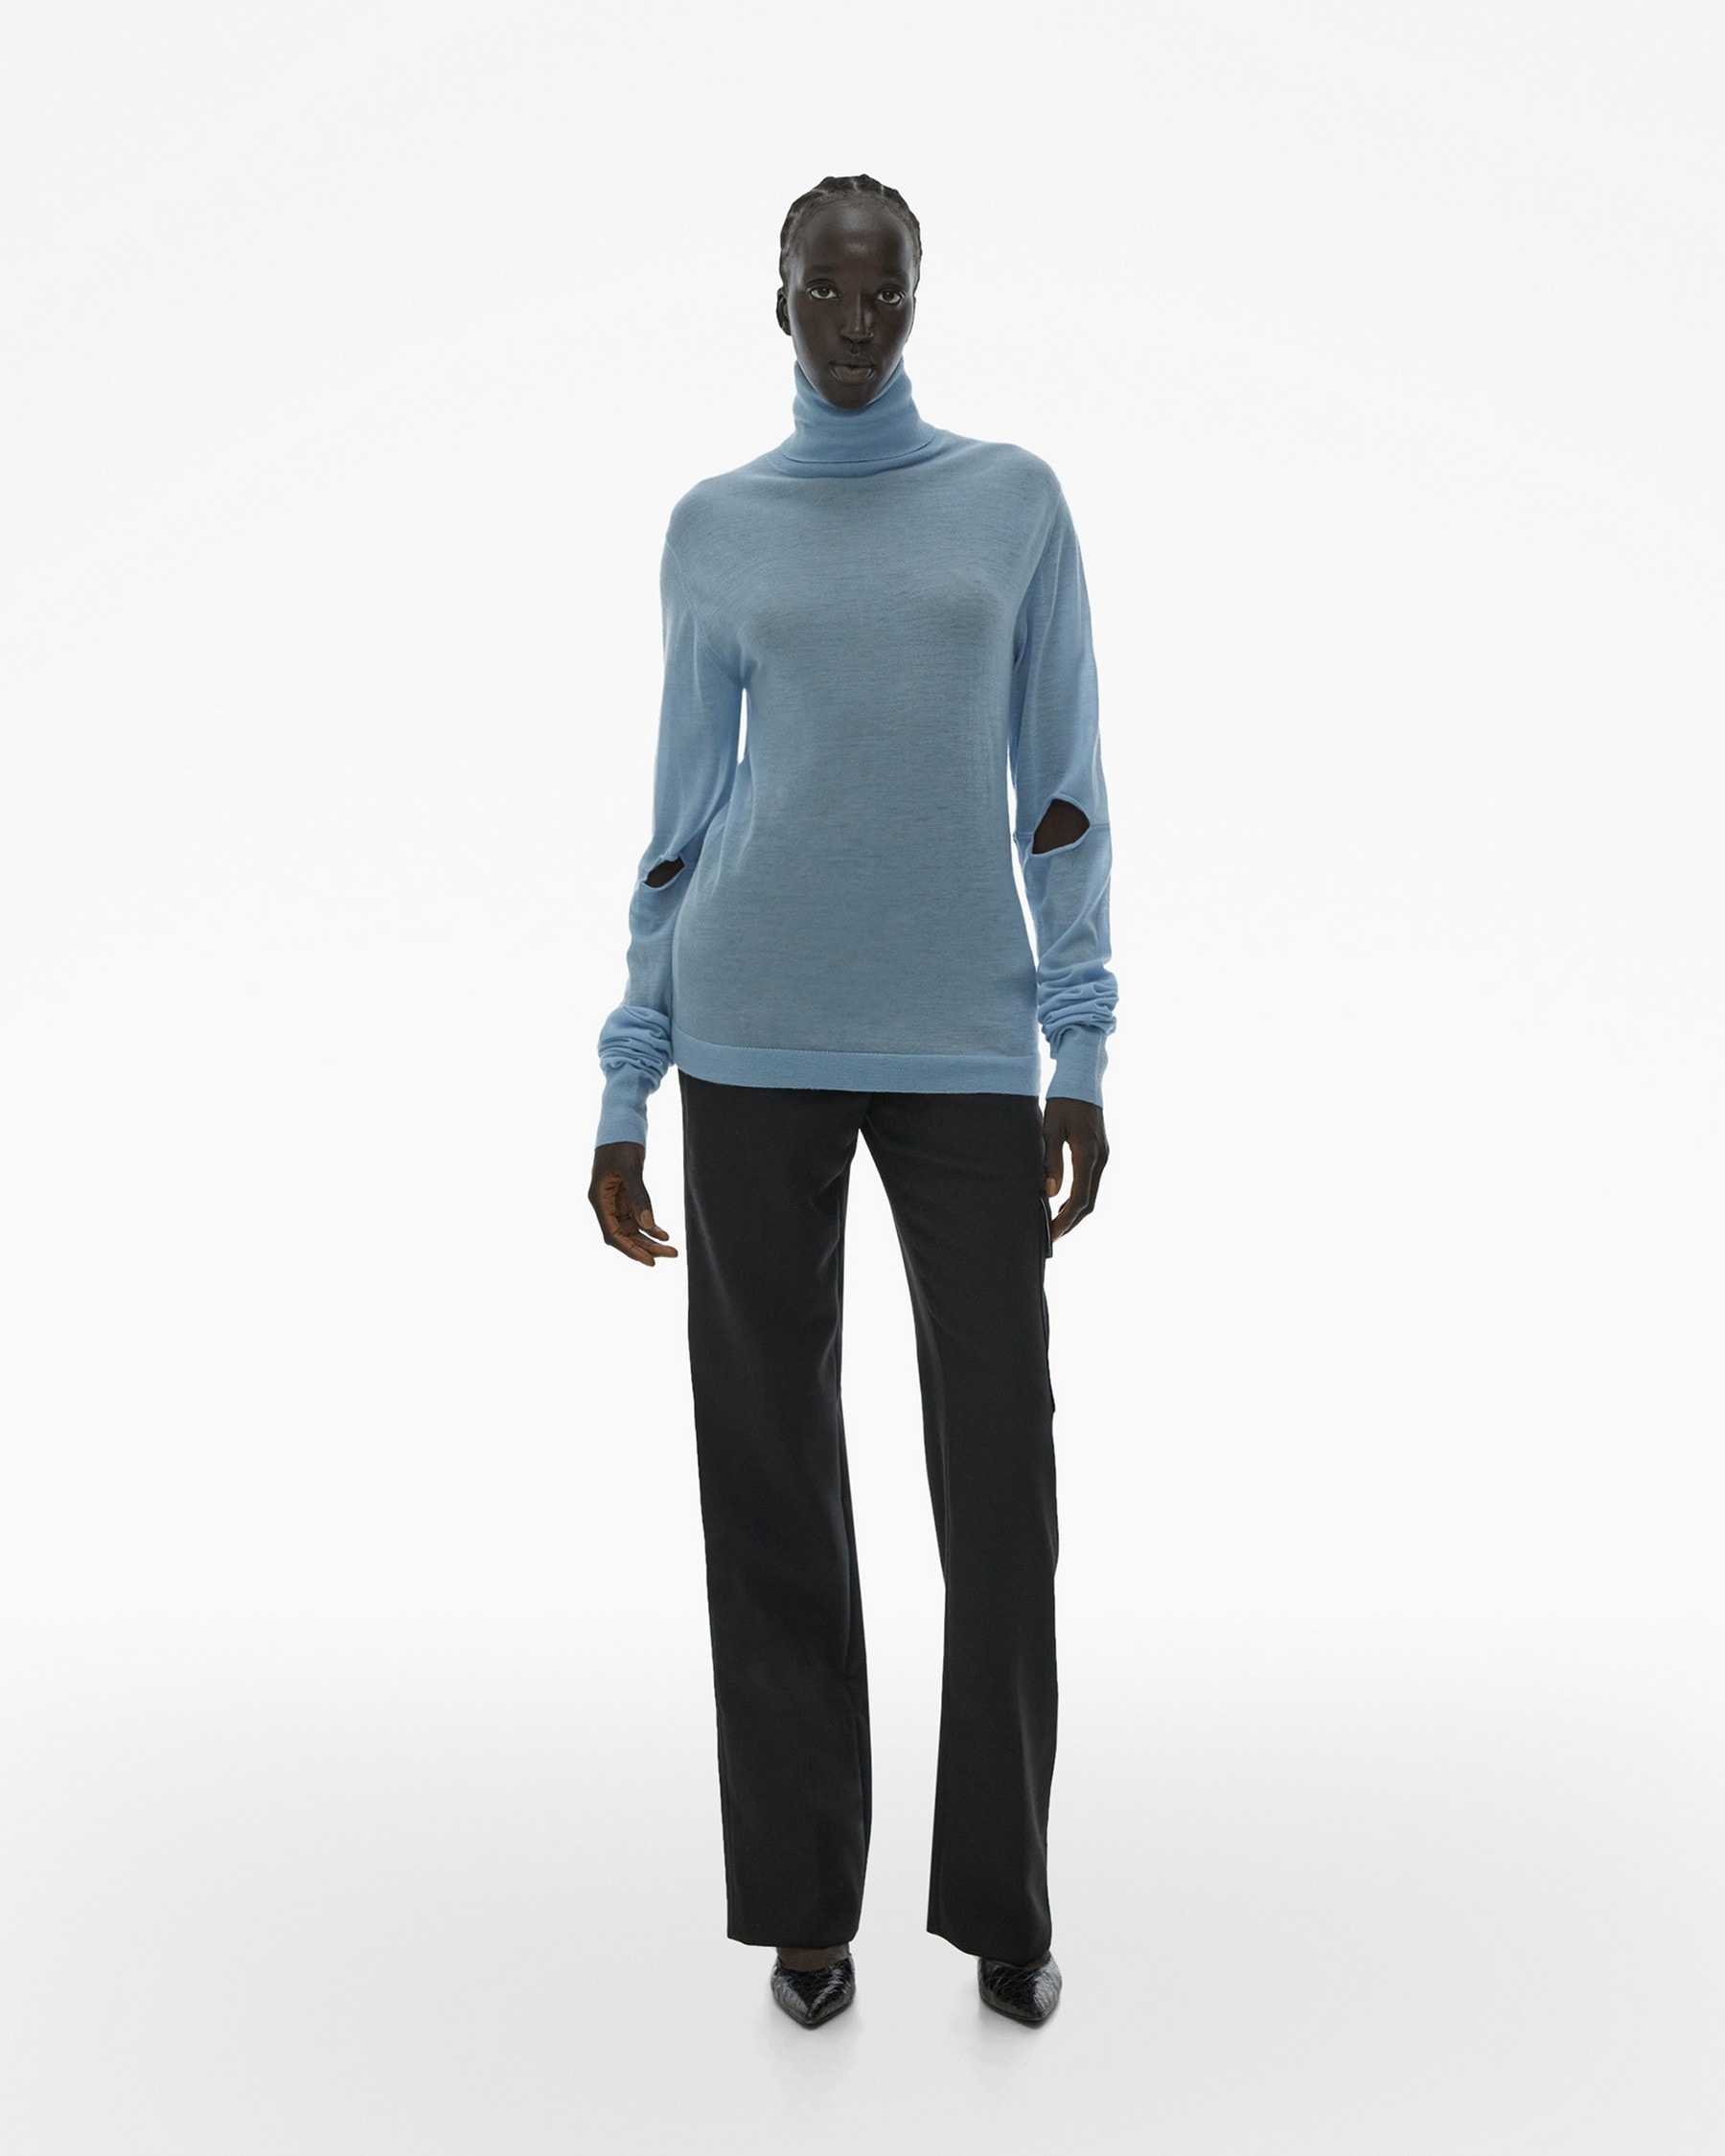 CUT-OUT TURTLENECK SWEATER - 8